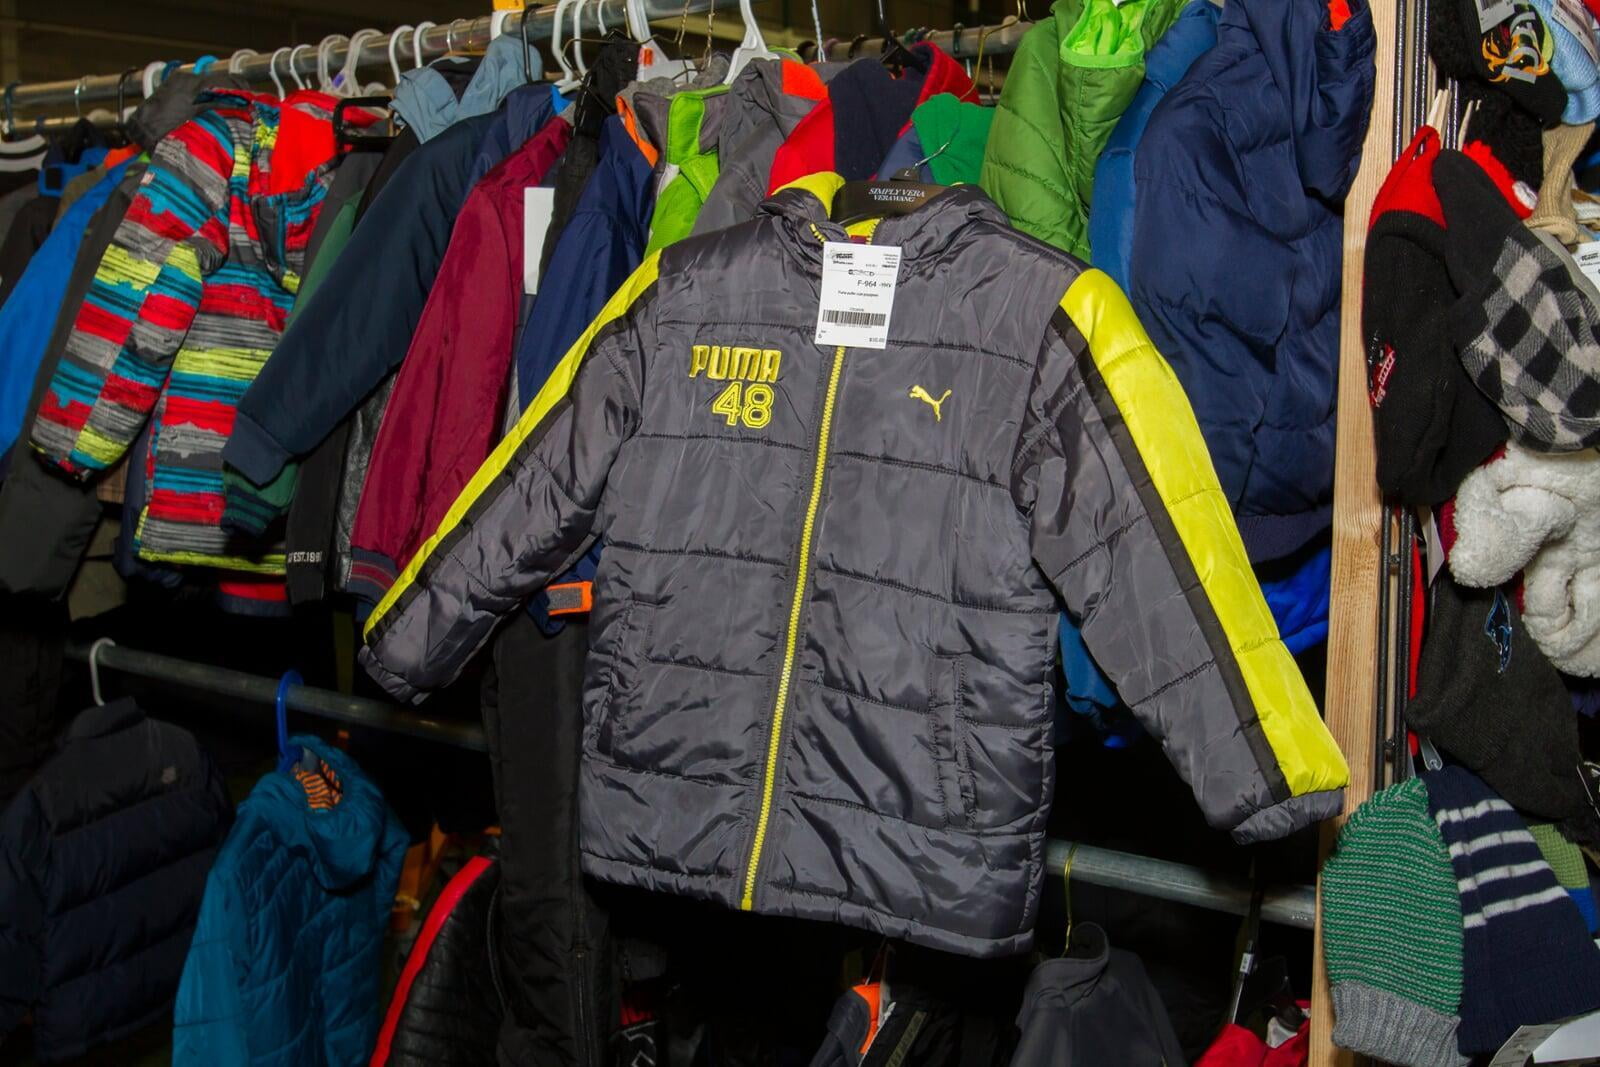 Gray Puma winter jacket with lime green piping hangs on a rack of boys clothing.